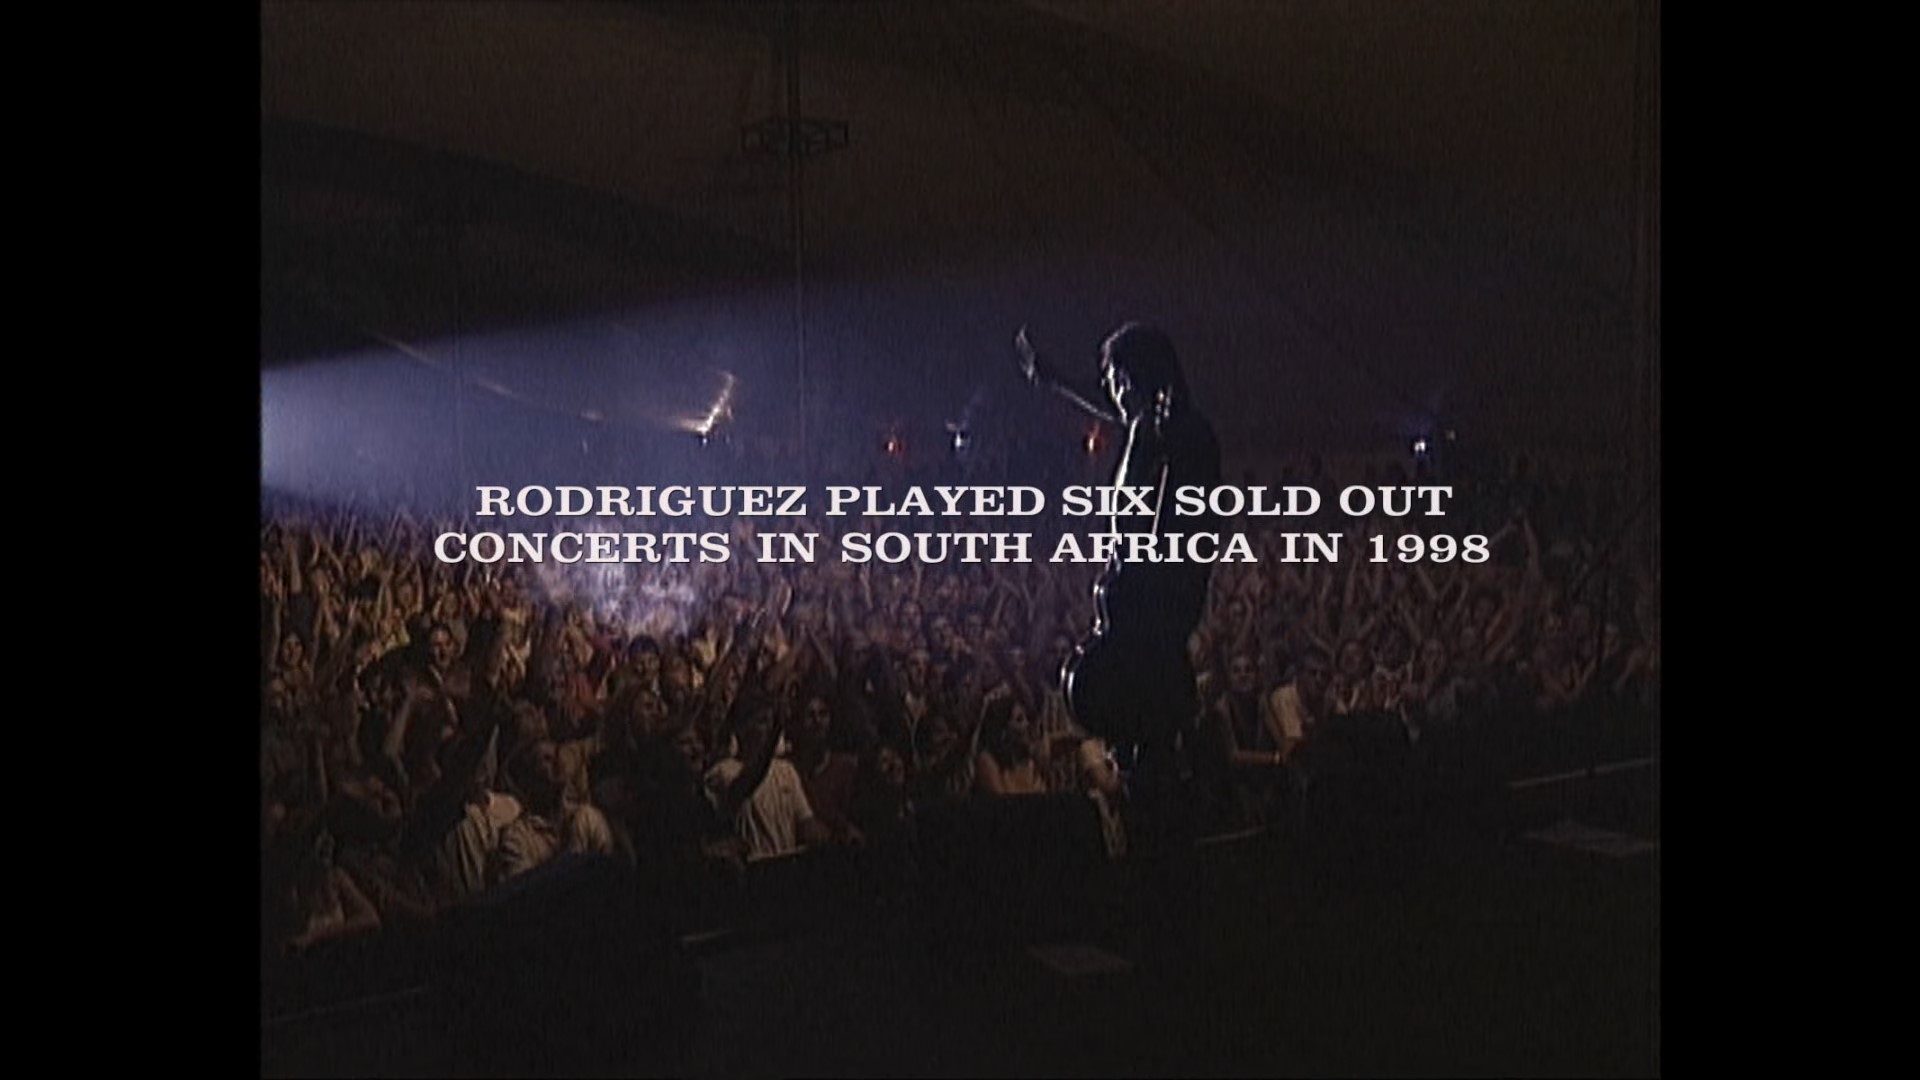 RODRIGUEZ concert in South Africa in 1998 (Source - movie Searching For Sugar man)